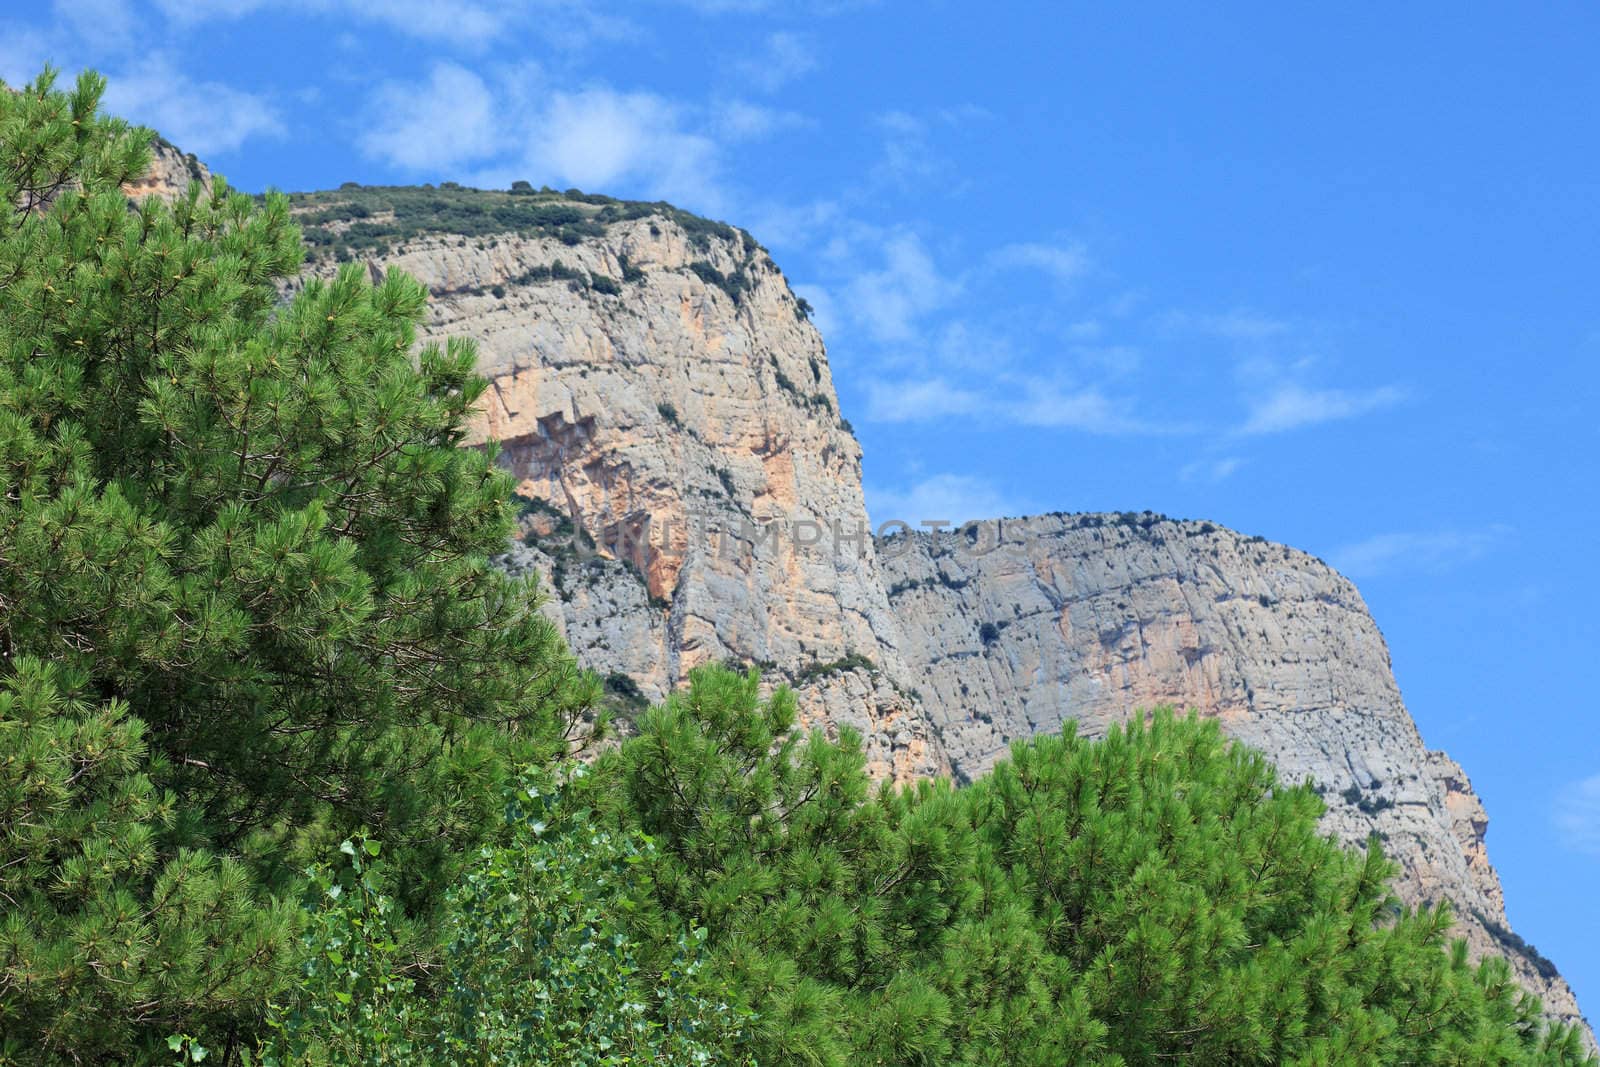 High cliffs and pine trees as background.